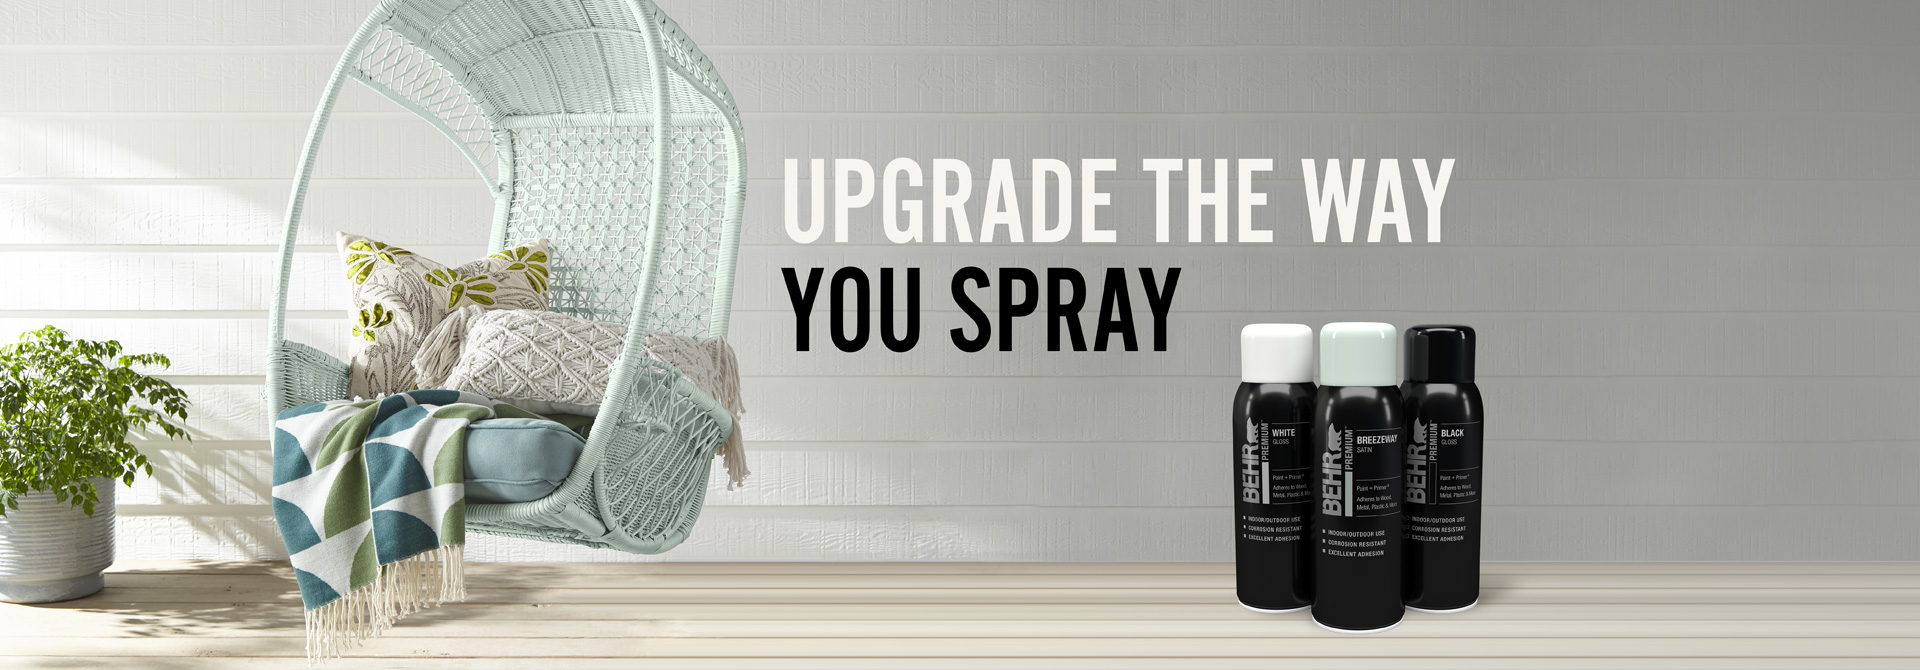 Behr Premium Spray paint cans with a chair in the background and text overlay that says Upgrade the way you spray.